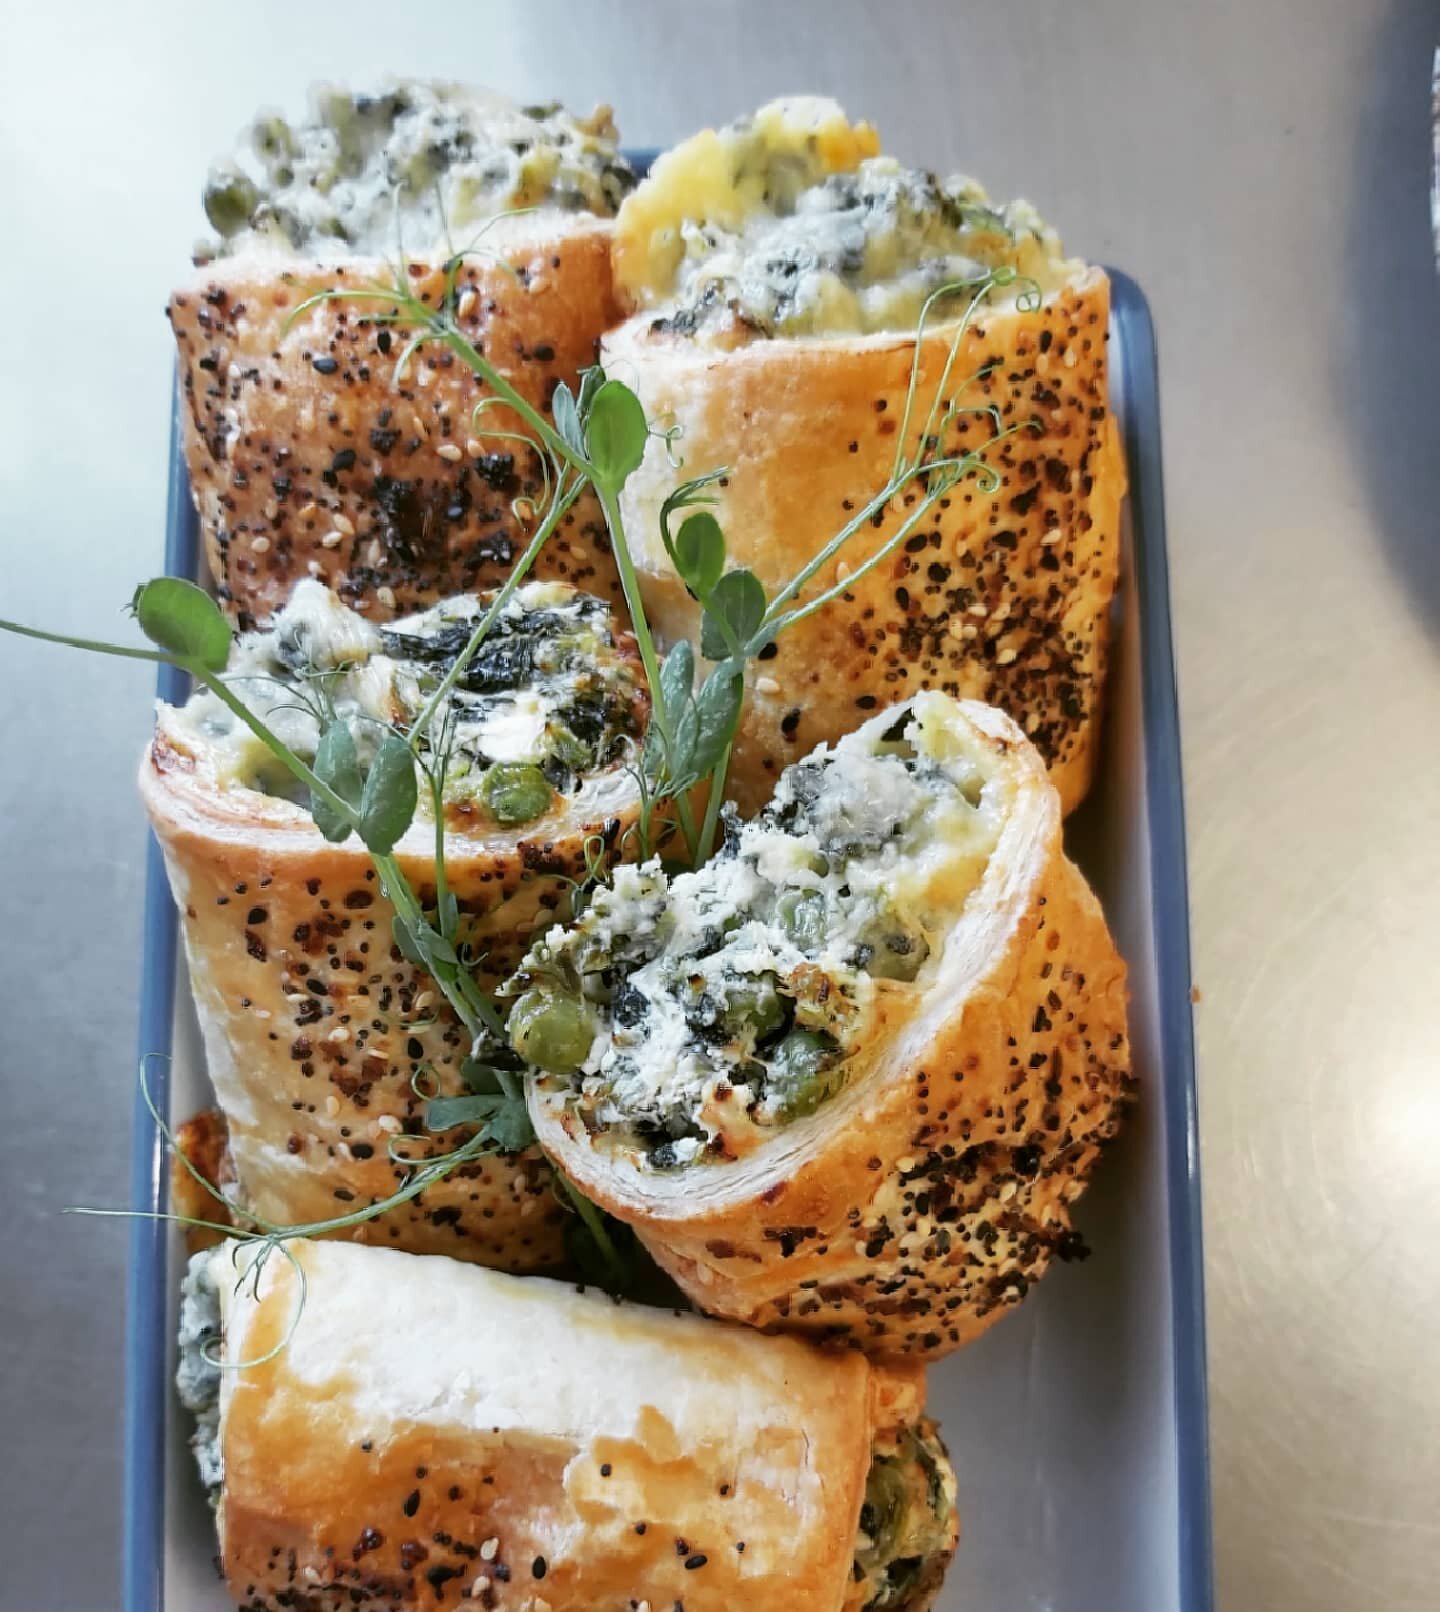 I'm loving being back!
Come and grab some delicious colorful food from the Cools cabinet today! 
Our spinach &amp; feta puffs are a local favourite with just the right amount of peas to make your mouth pop!
Have a wonderful Saturday everyone 😁☕🥪🥗
